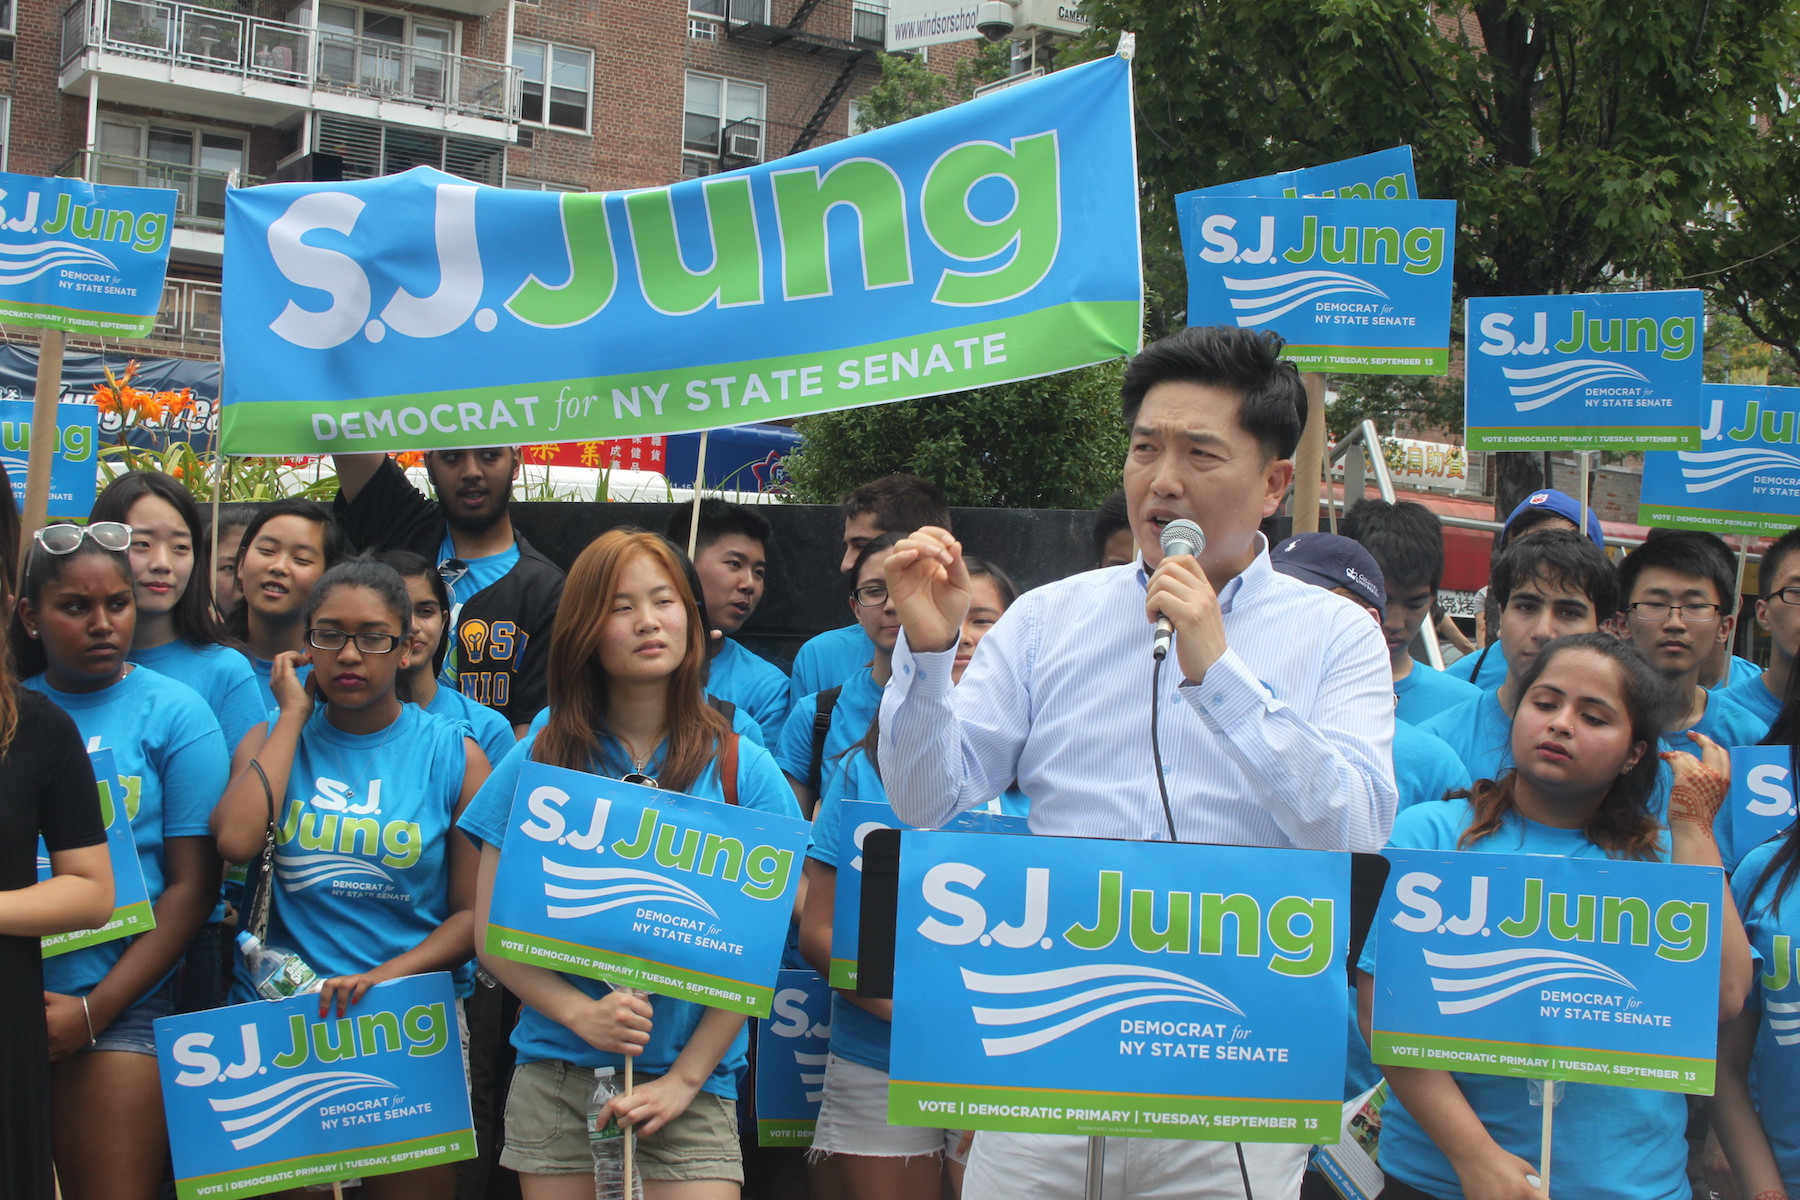 S.J. Jung at a campaign rally in July.